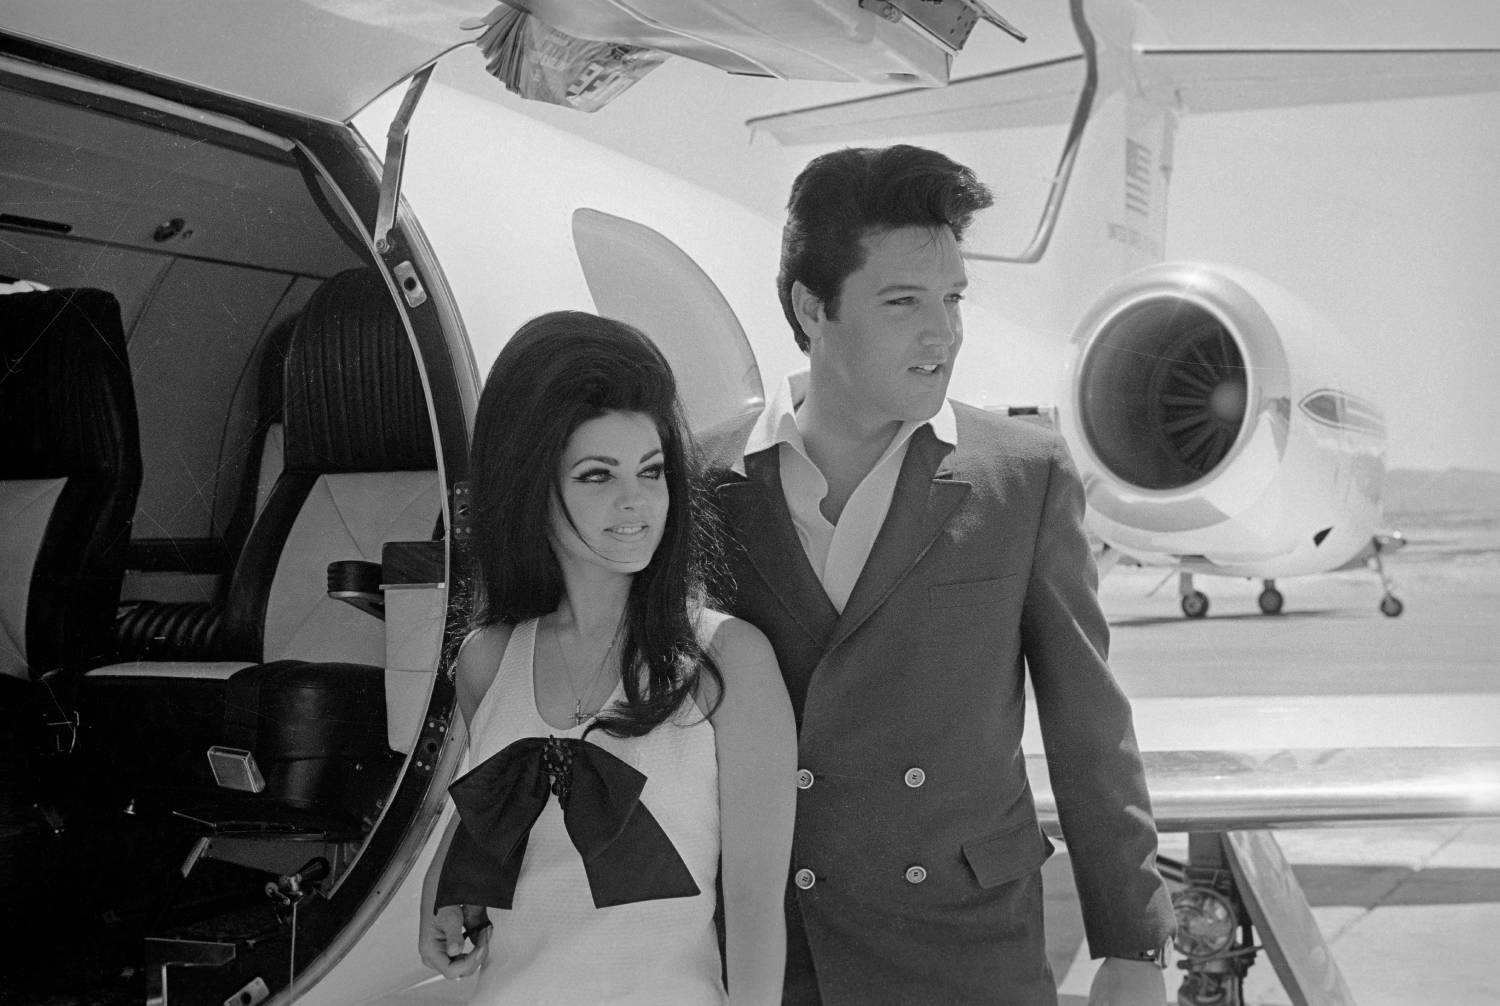 Newlyweds Elvis and Priscilla Presley, who met while Elvis was in the Army, prepare to board their private jet following their wedding at the Aladdin Resort and Casino in Las Vegas.